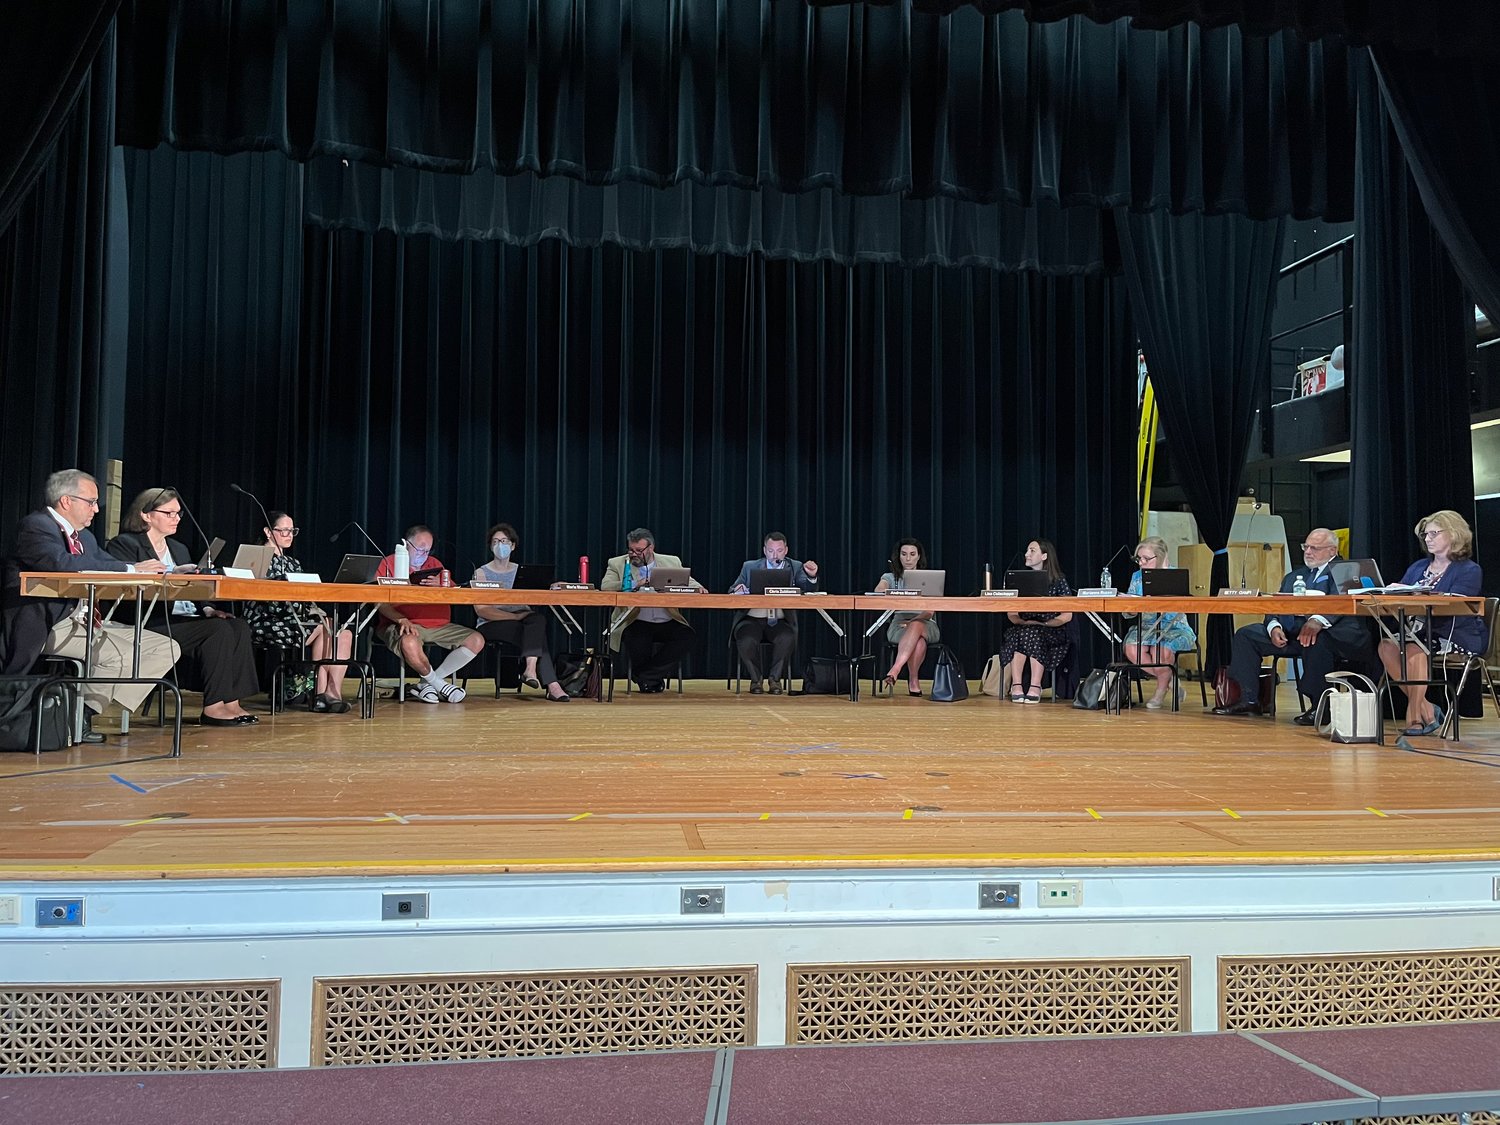 The North Shore Schools District Board of Education announced the LIPA deal at their July 1 reorganization meeting.